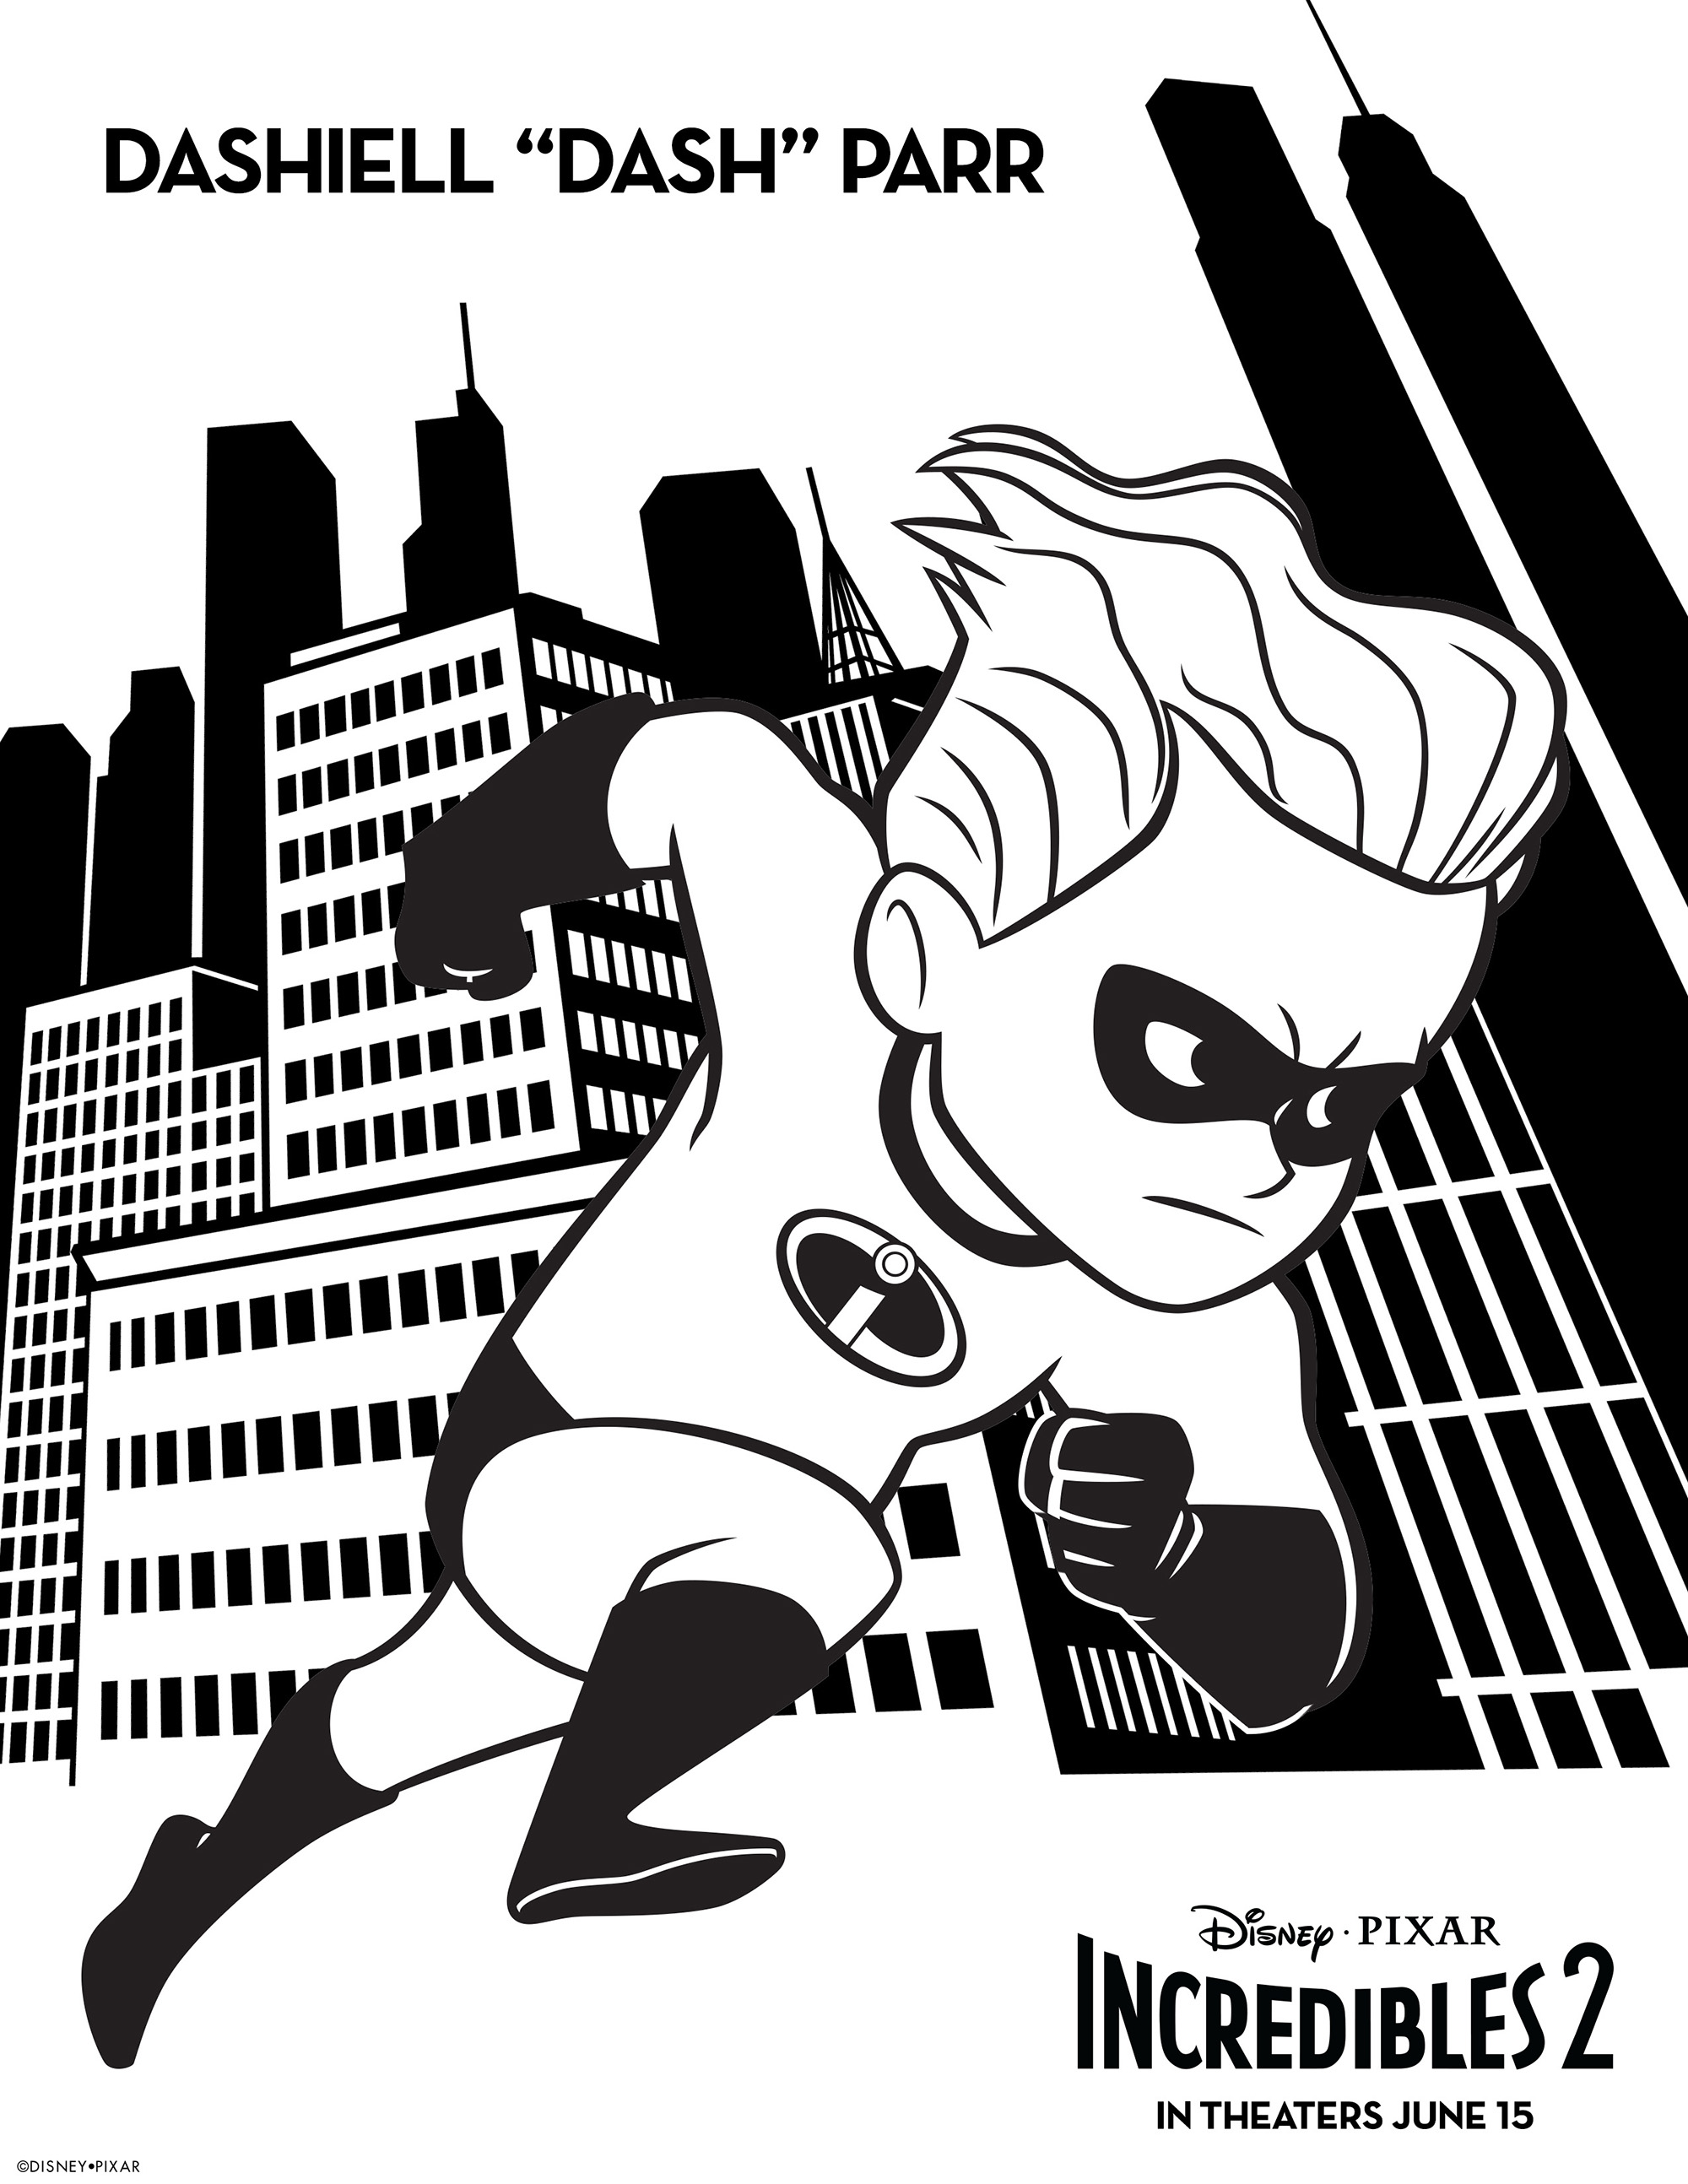 Free Incredibles 2 coloring page to print and color, for kids : Dashell 'Dash' Parr